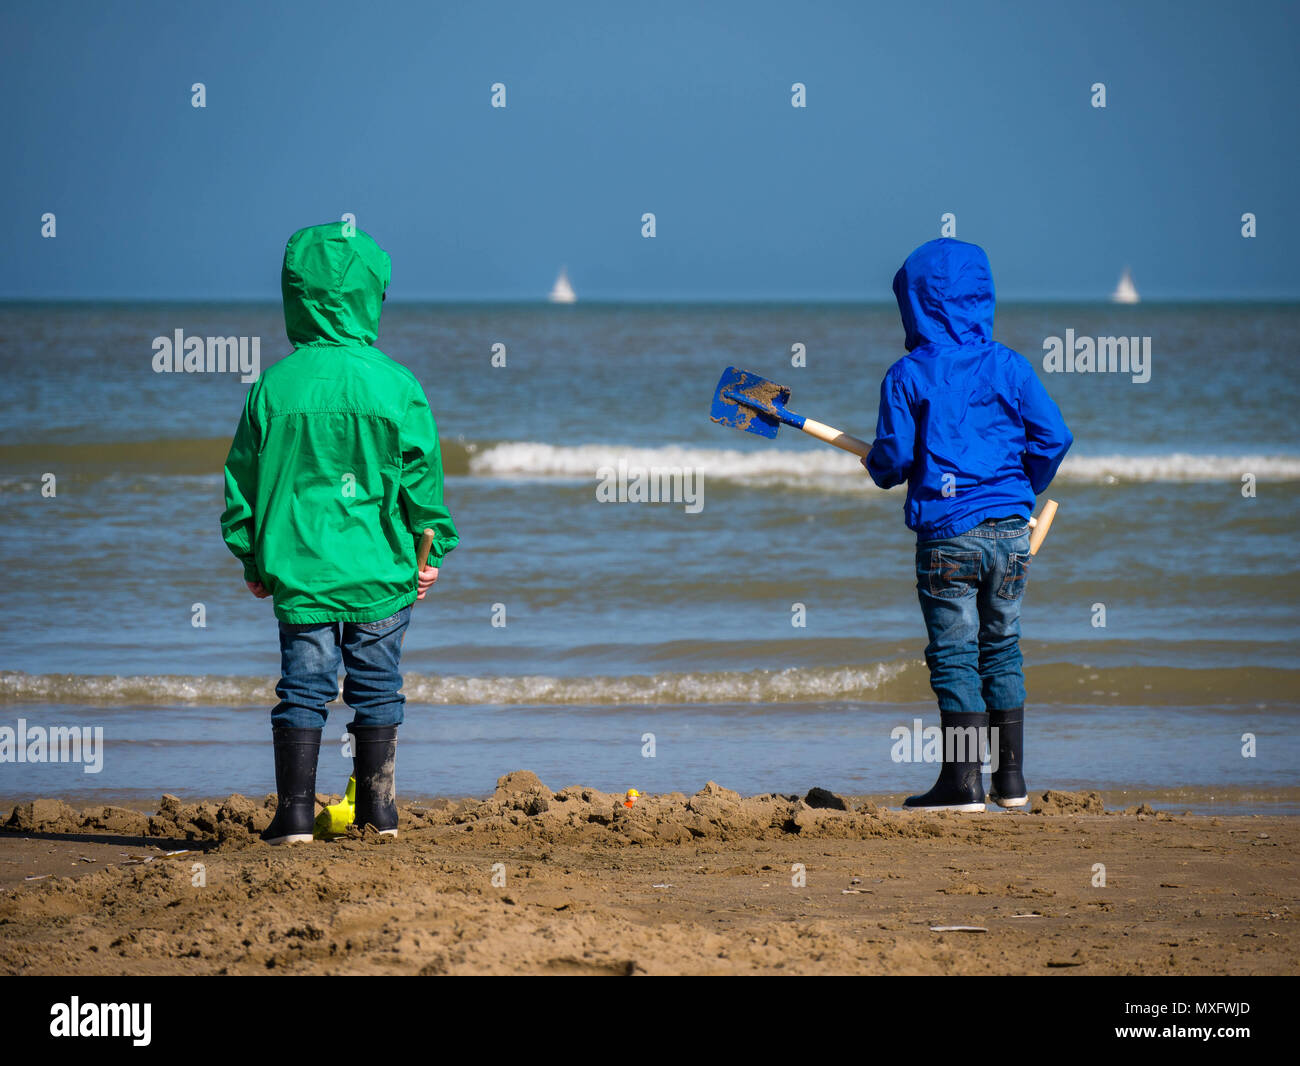 Two boys from behind looking towards the open sea in Bray-Dunes, France Stock Photo